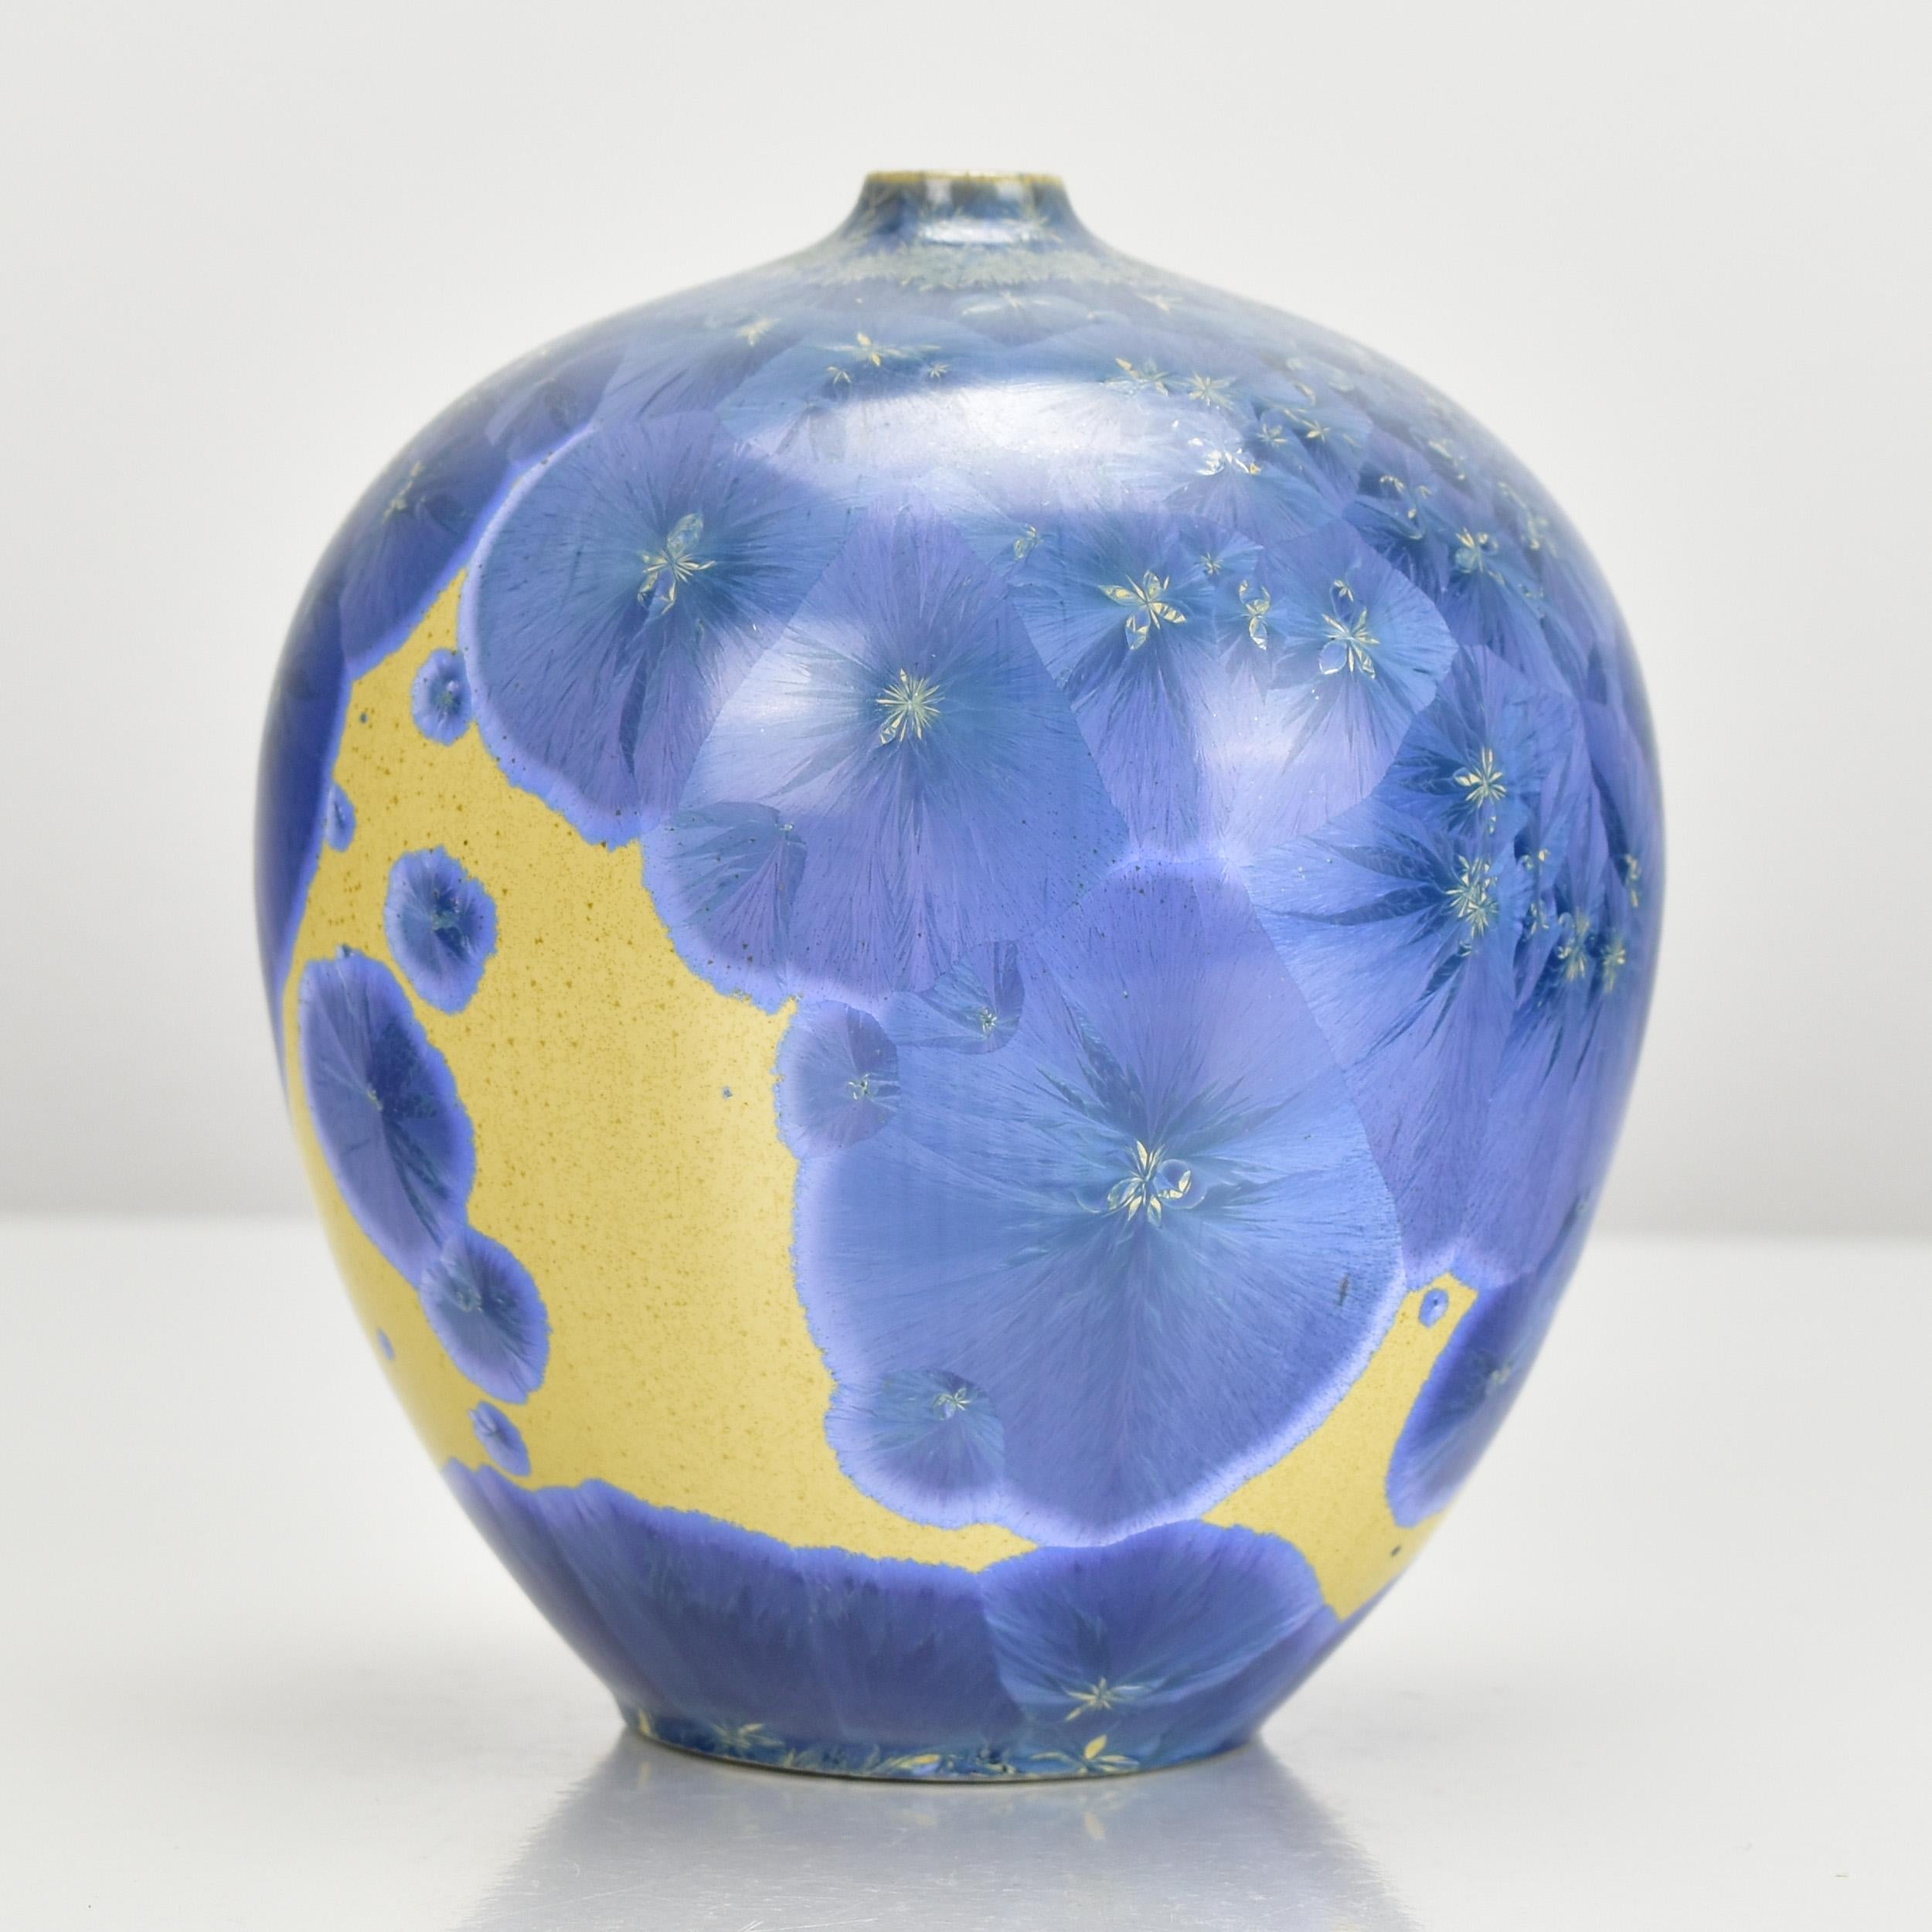 A delicate studio ceramic soliflor vase with a blue crystalline glaze on an ocher-colored ground, signed by an unknown artist. The vase exhibits fine craftsmanship and features a beautiful combination of colors, making it an intriguing decorative